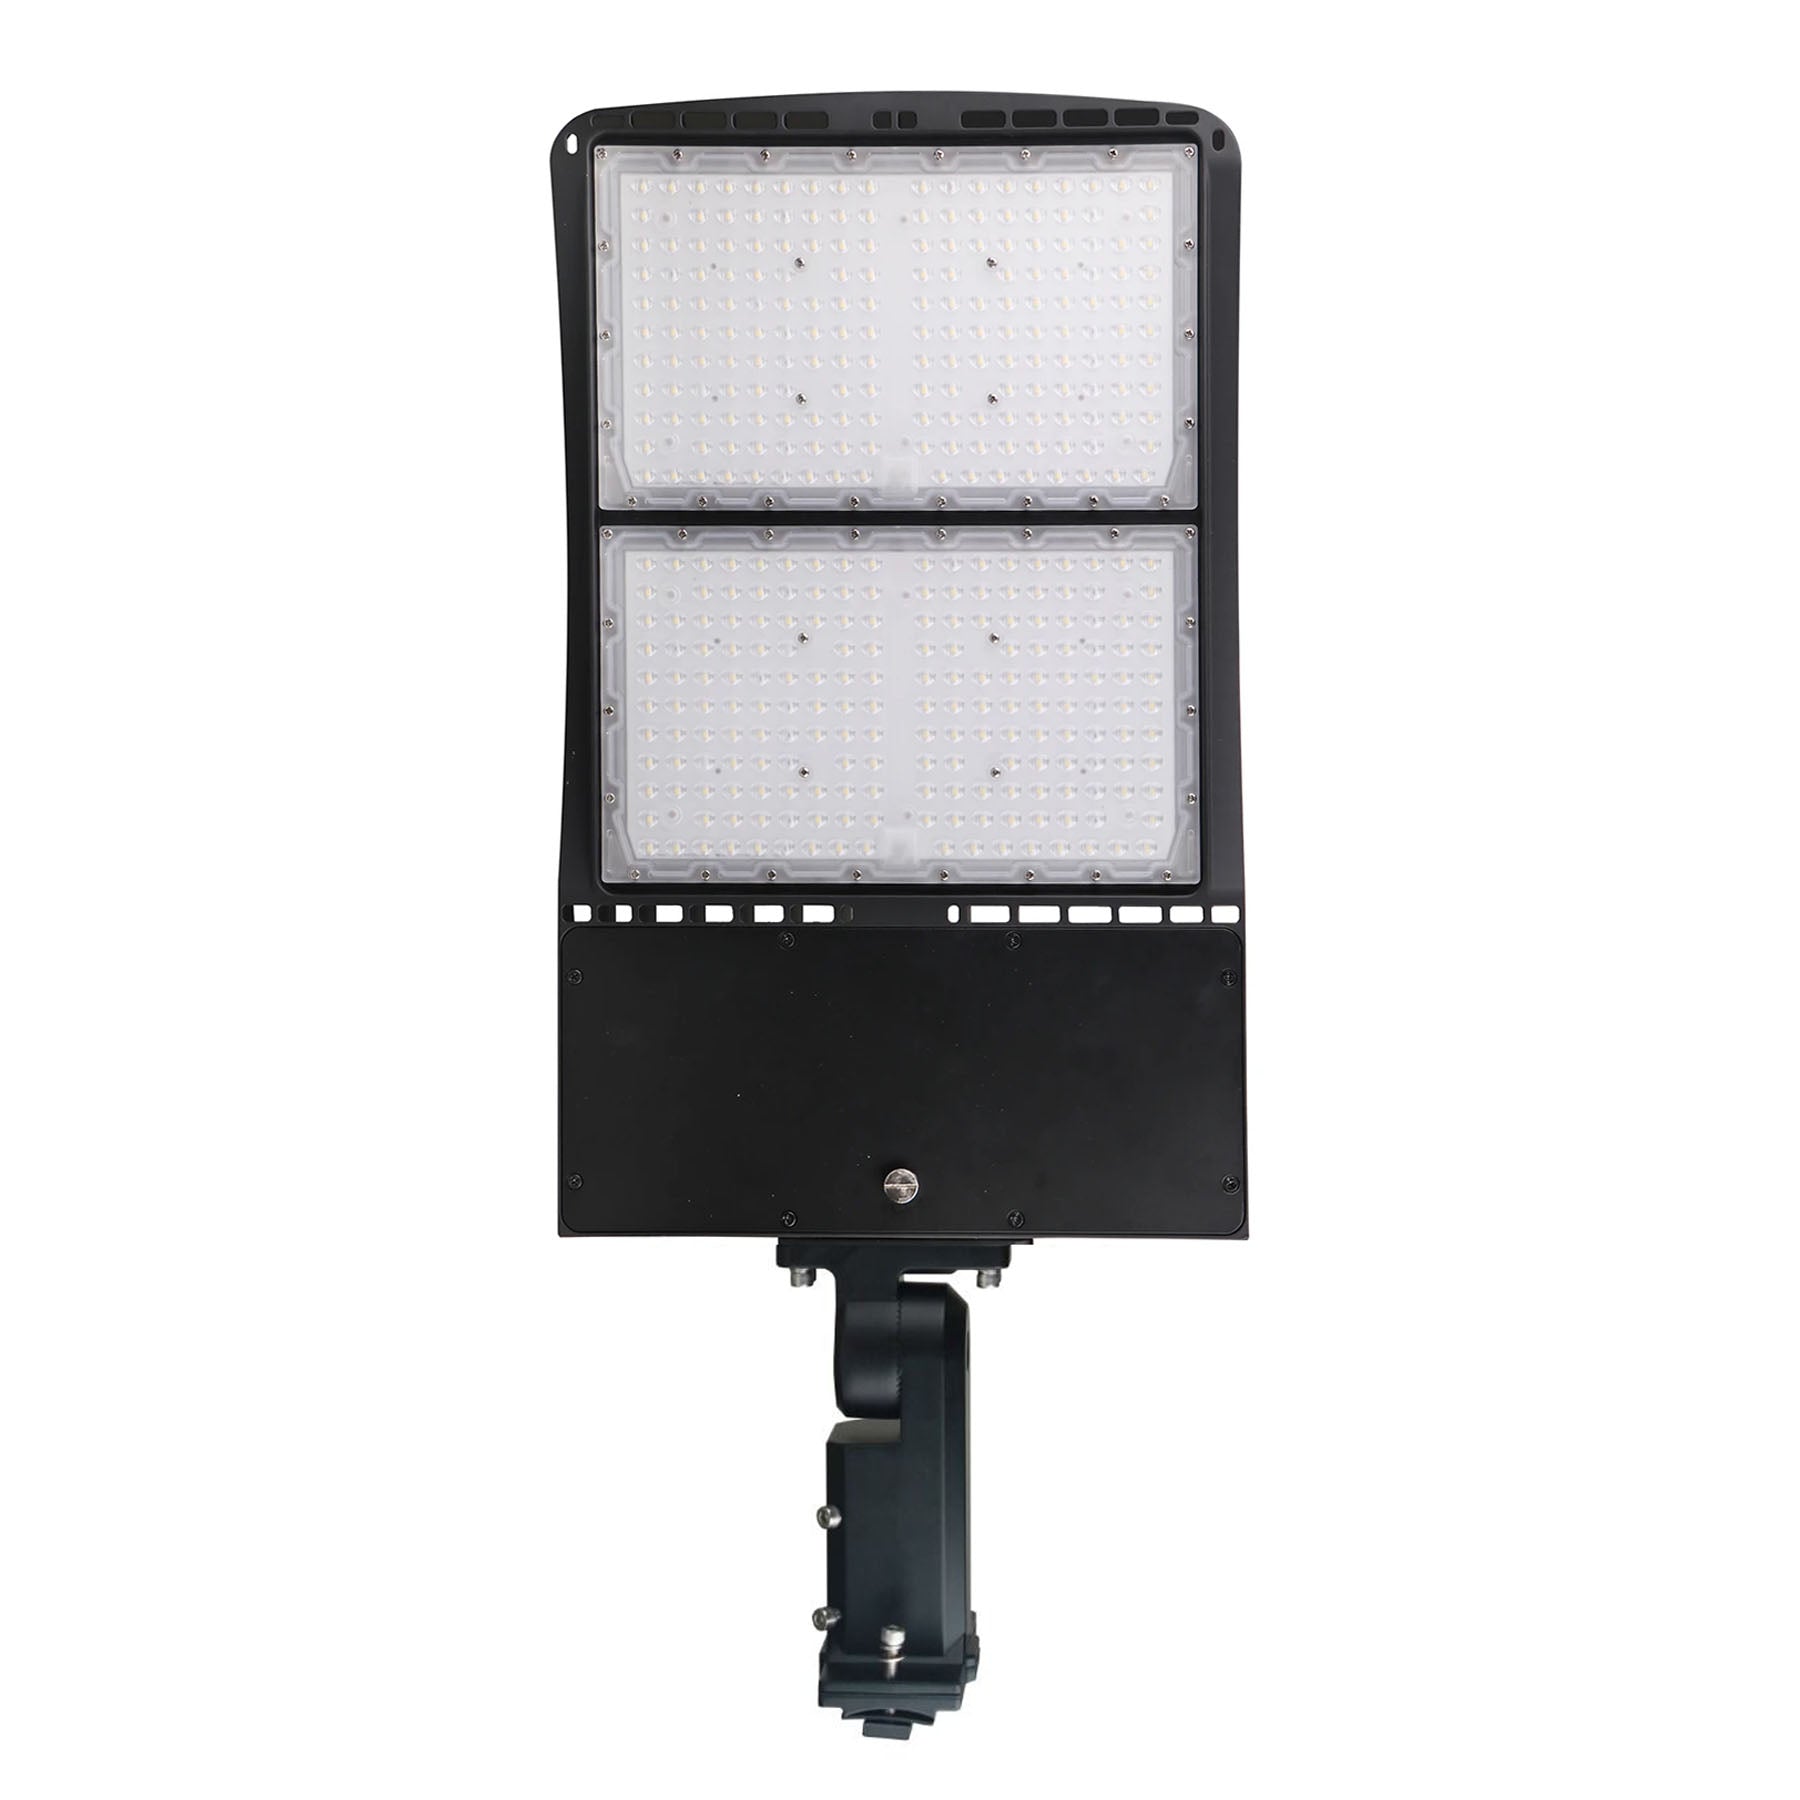 240W LED Pole Light with  Dusk to Dawn Photocell, 5700K, Universal Mount, Bronze, IP65 Waterproof, AC120-277V, Commercial LED Street Area Light - Parking Lot Lights